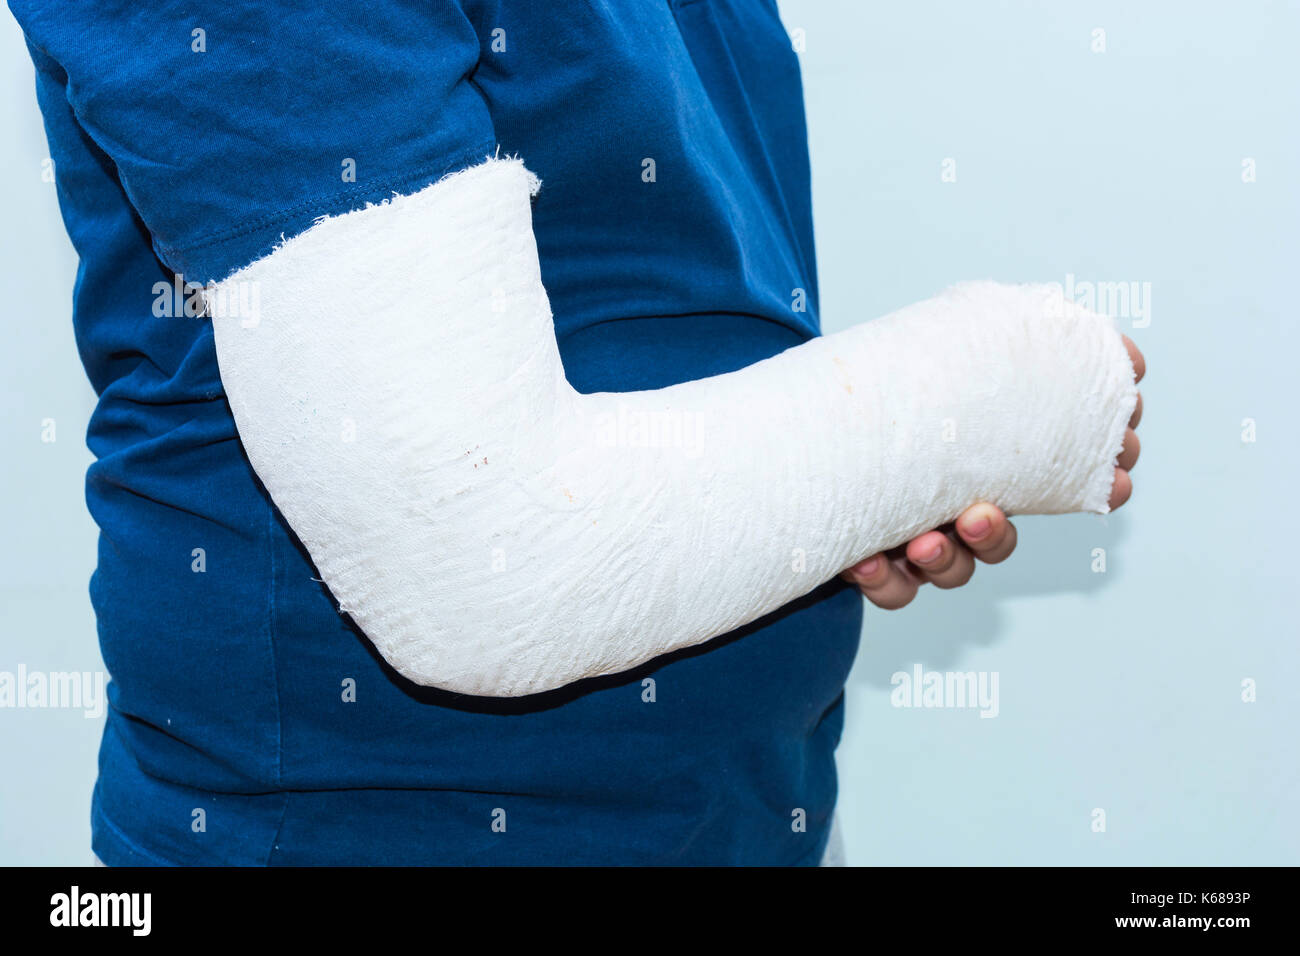 Boy with broken arm, plaster on arm as therapy. Close up of a young man's white long arm plaster / fiberglass cast covering the wrist, arm, and elbow  Stock Photo